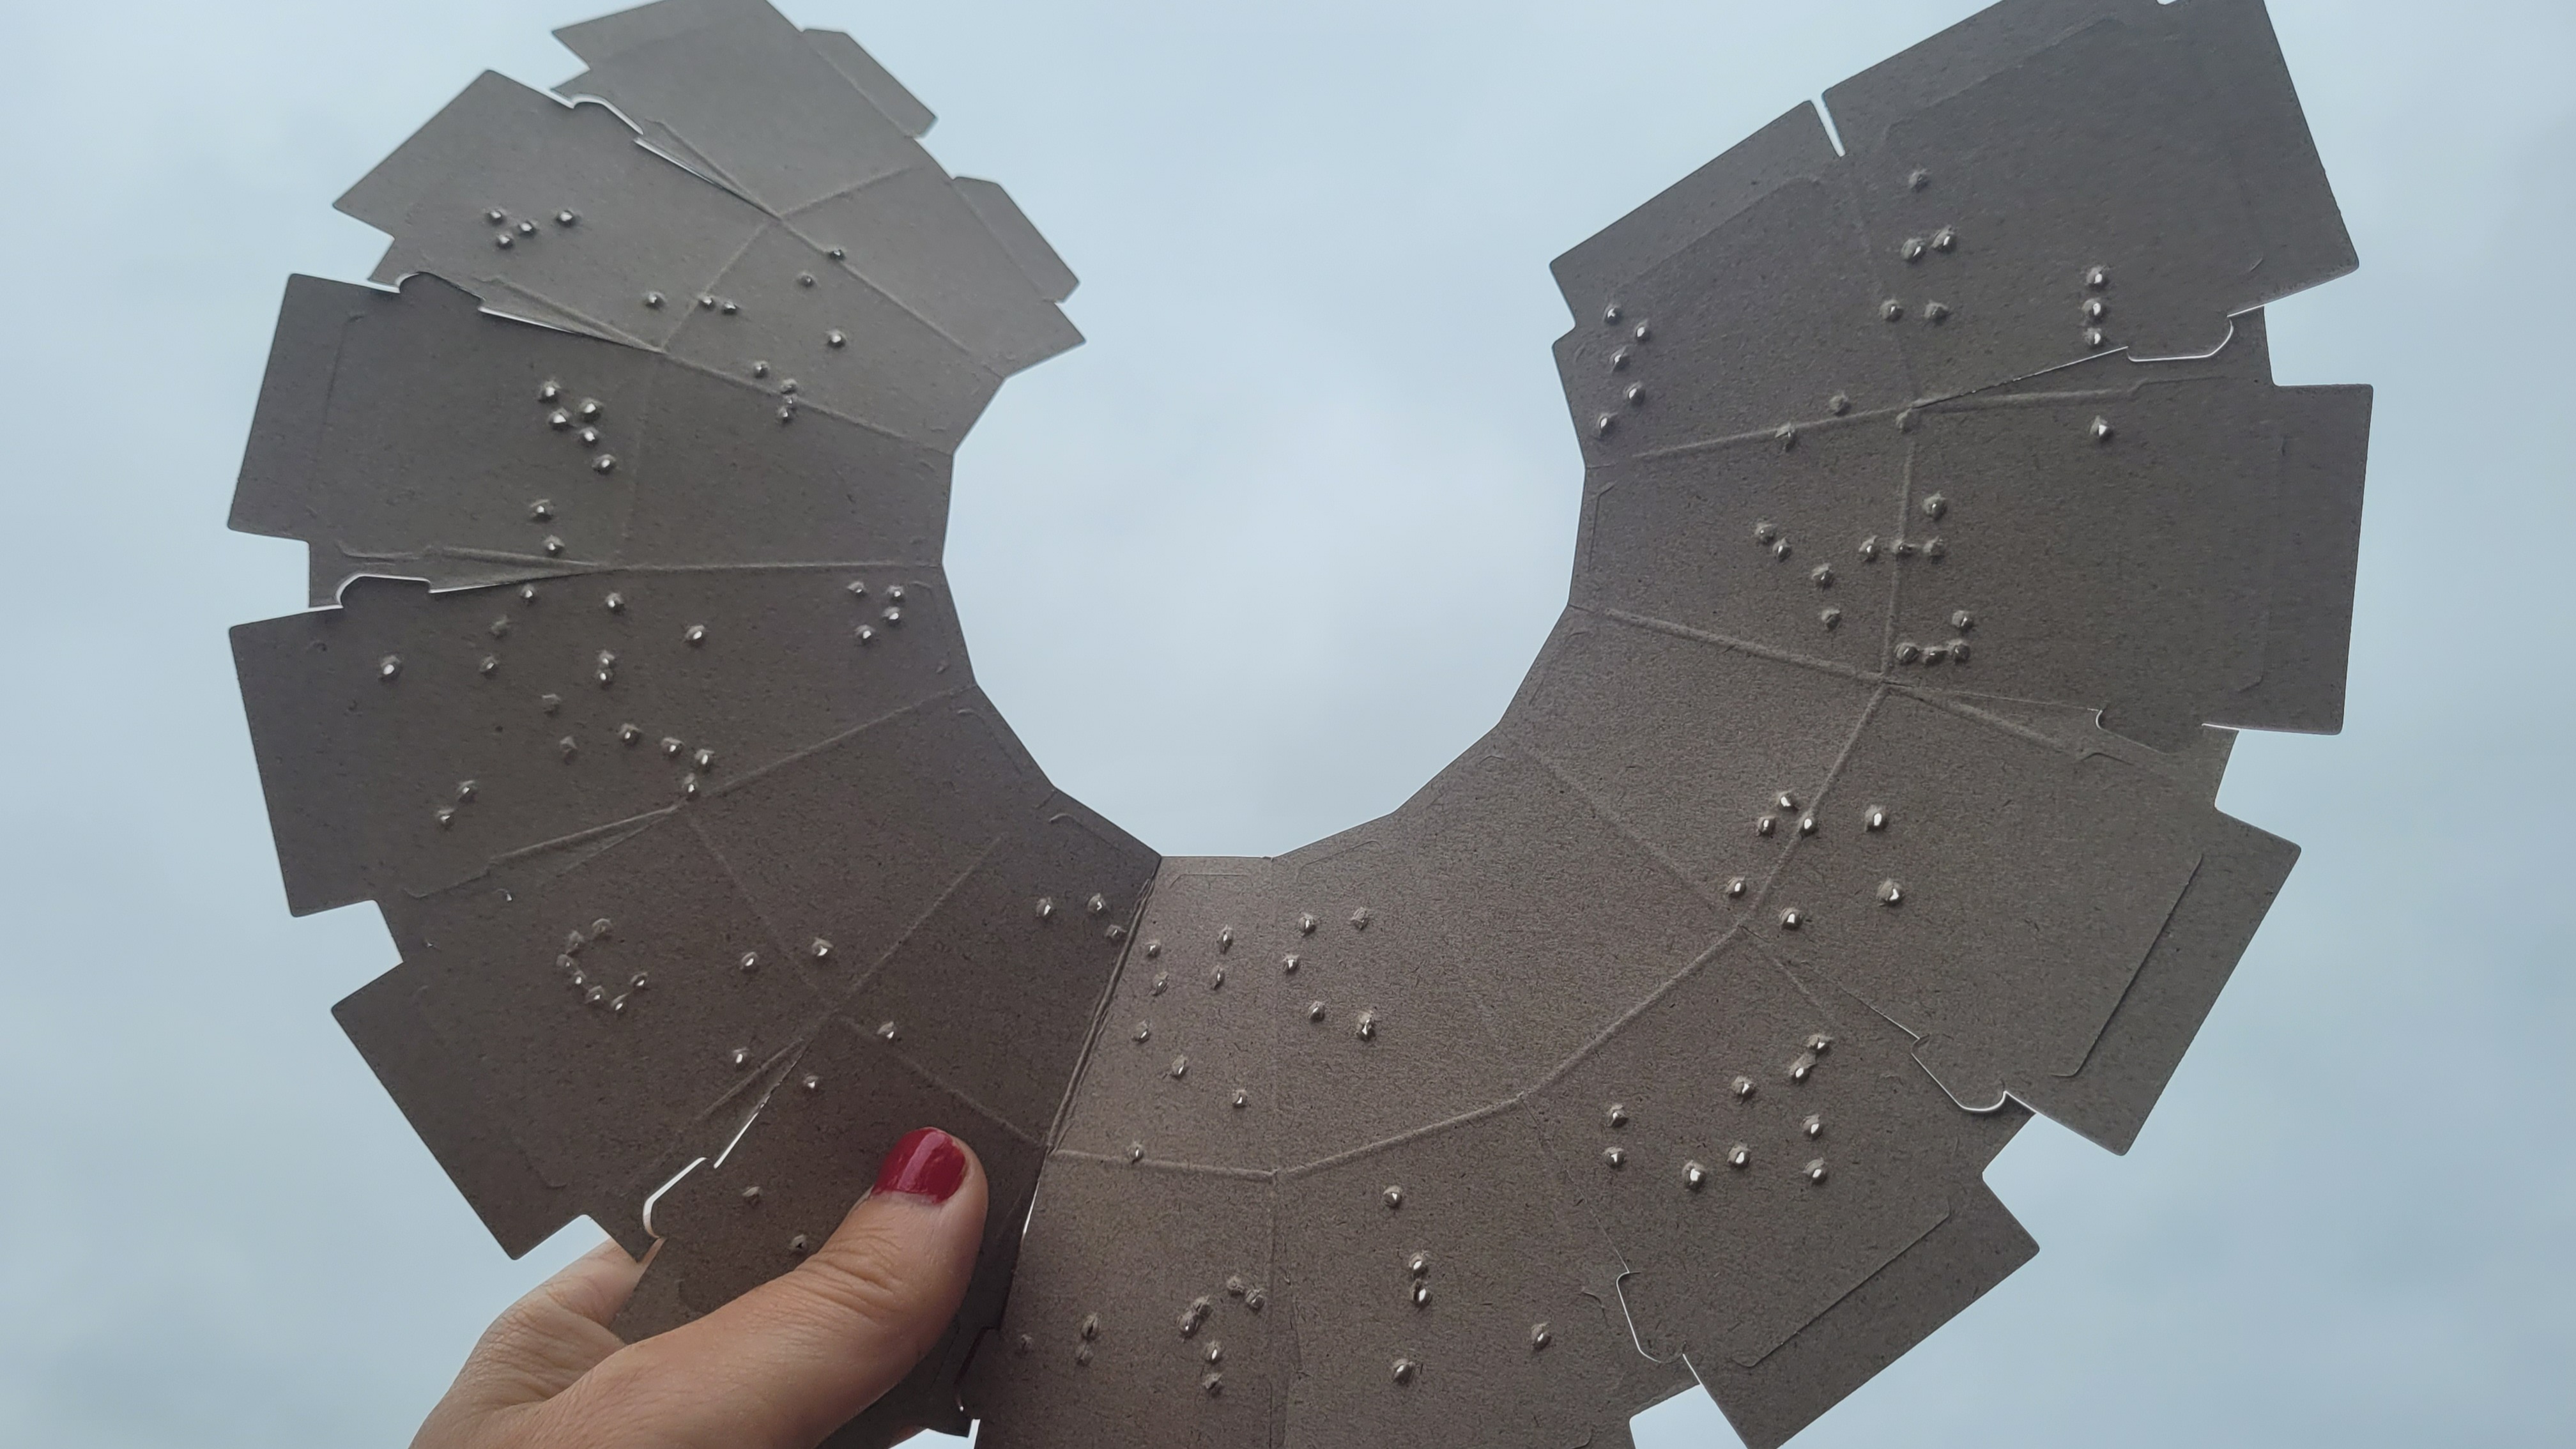 Person holding the cardboard kit up to the sky showing the locations of punched out holes